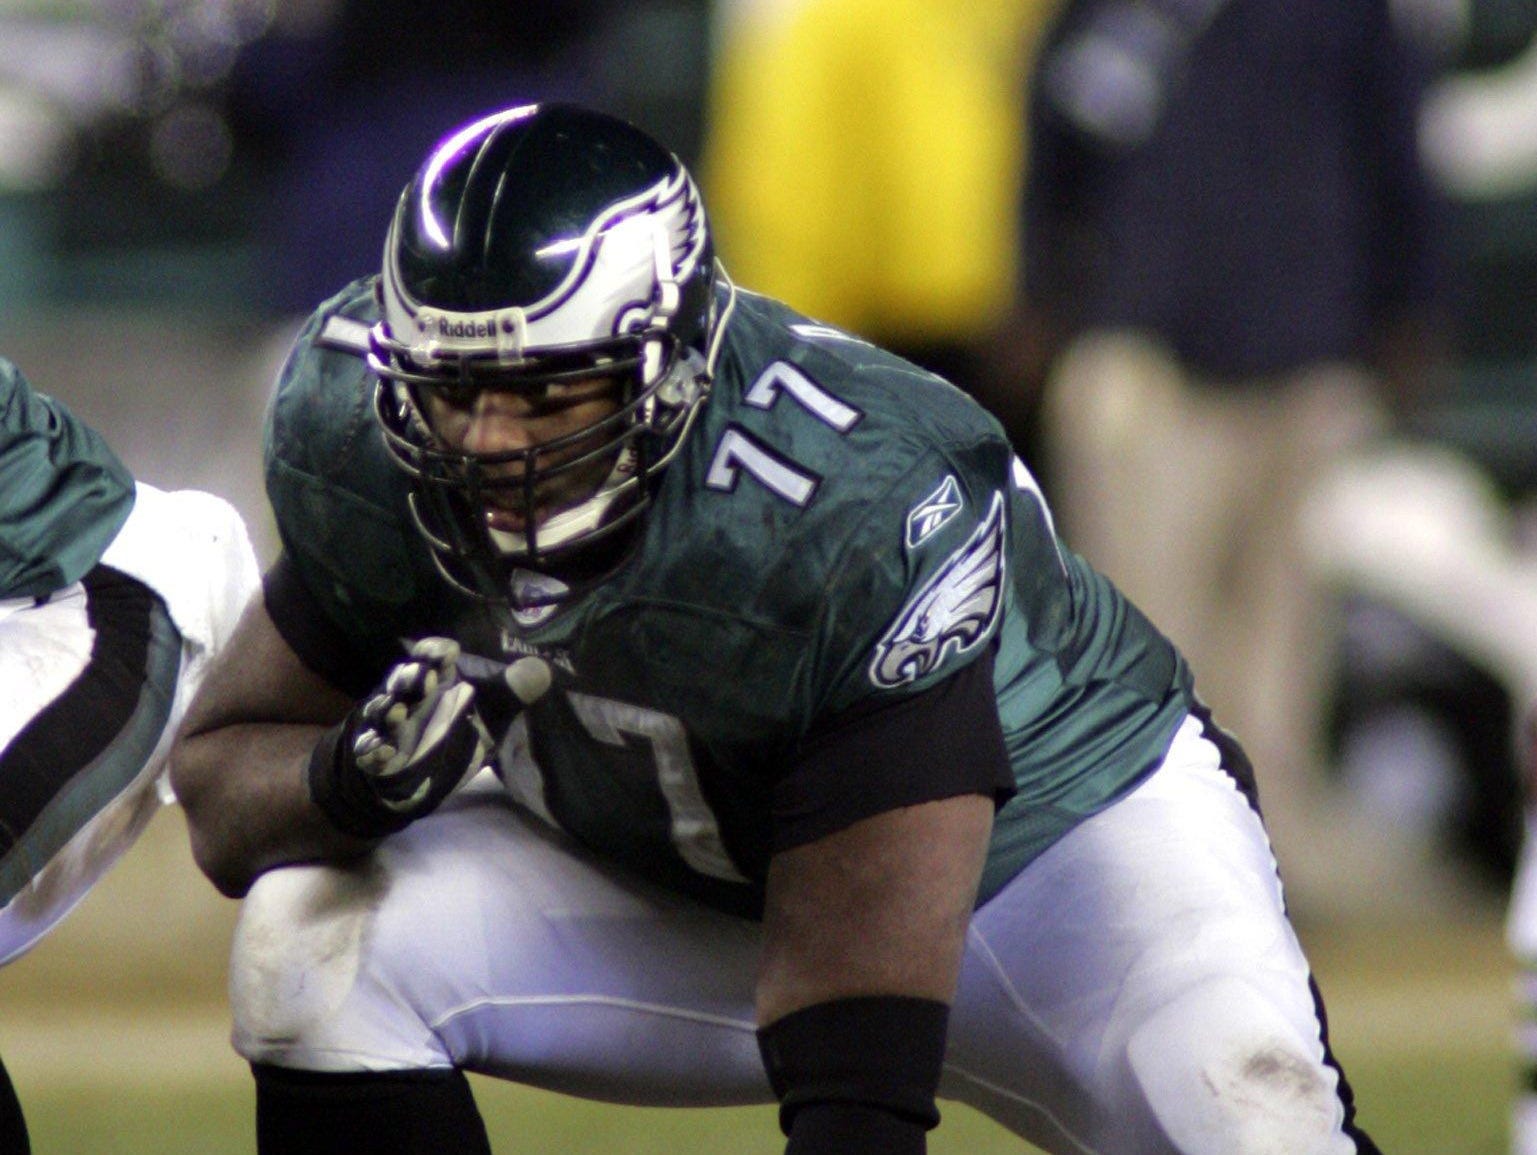 Philadelphia Eagles offensive lineman Artis Hicks gets set at the line during the NFC championship game against the Atlanta Falcons in this Jan. 23, 2005 photo in Philadelphia. (AP Photo/Miles Kennedy)